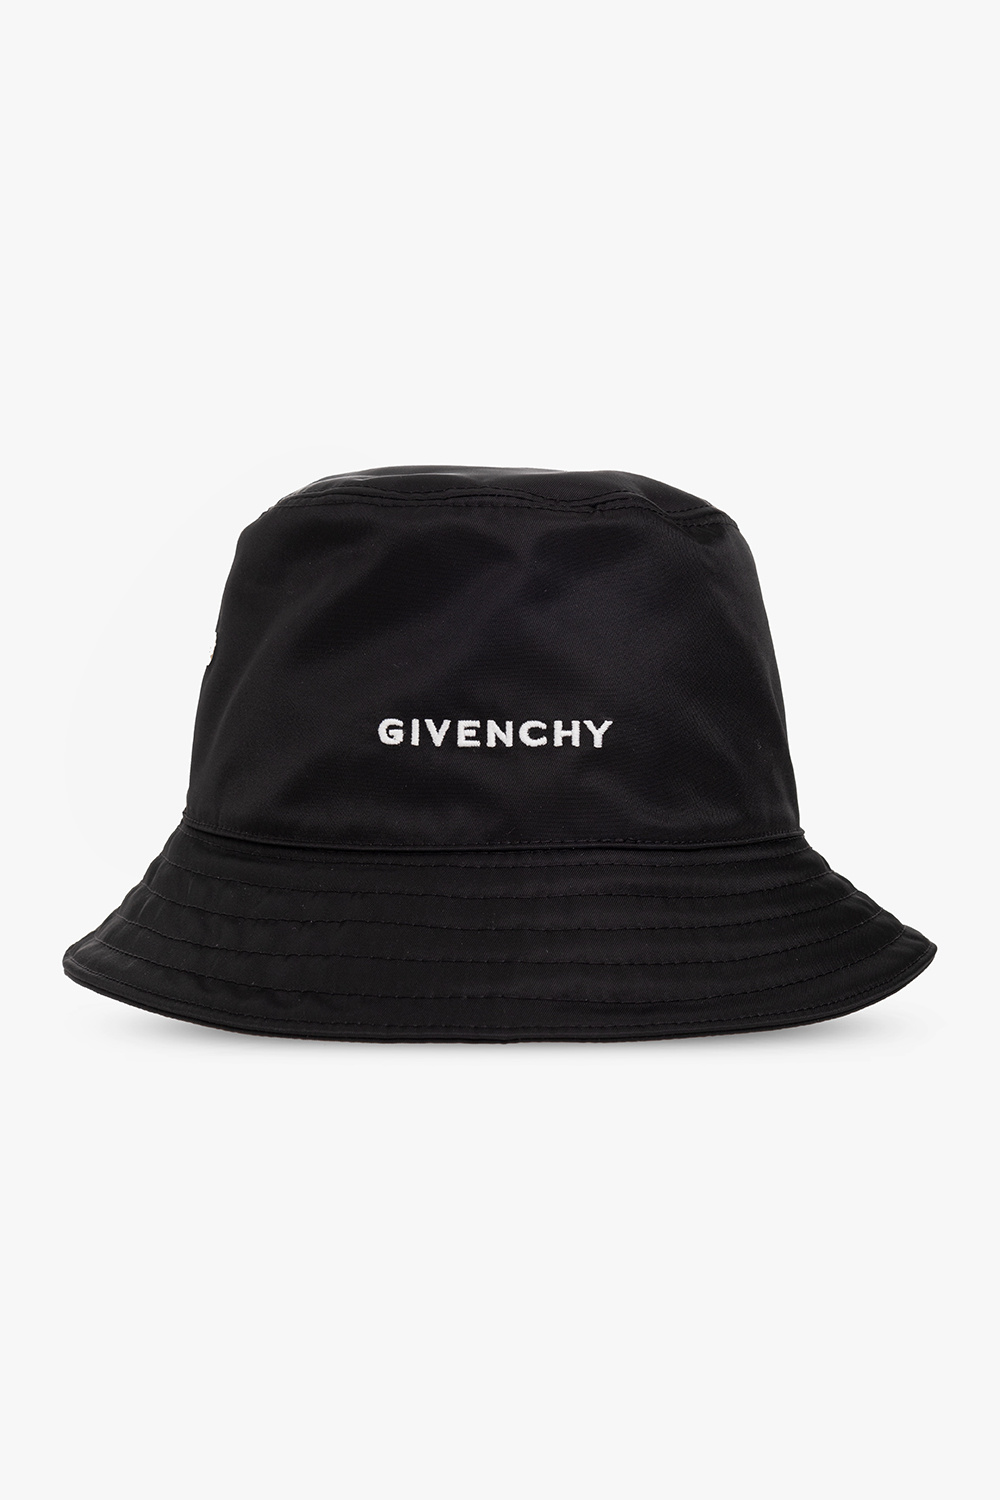 Givenchy wool hat Nero